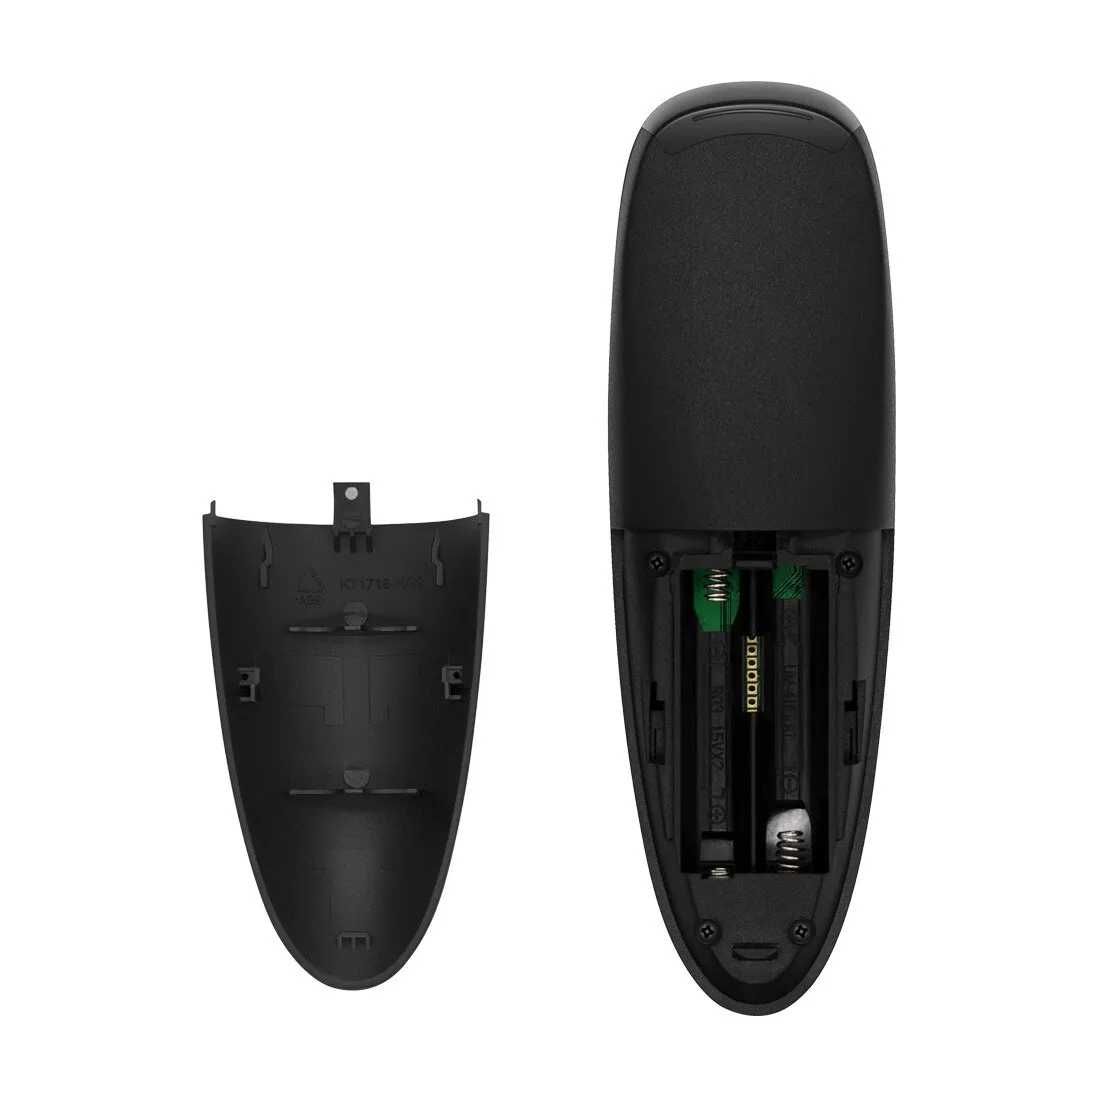 G10S Pro Air Mouse Voice Remote Control 2.4GHz Пульт Gyroscope IR